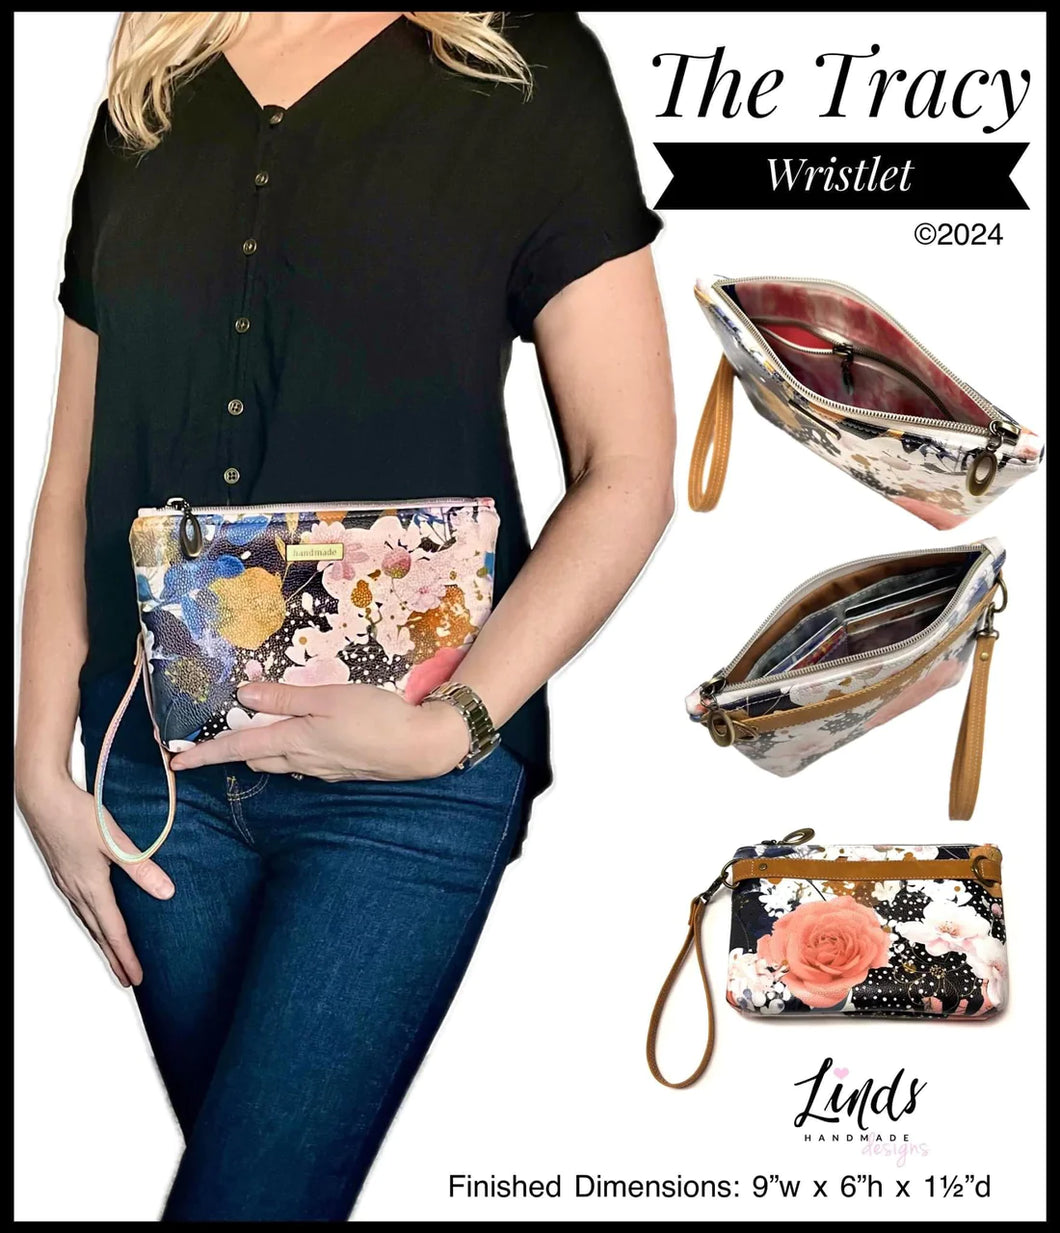 Linds Handmade Designs NEW Tracy Wristlet Templates